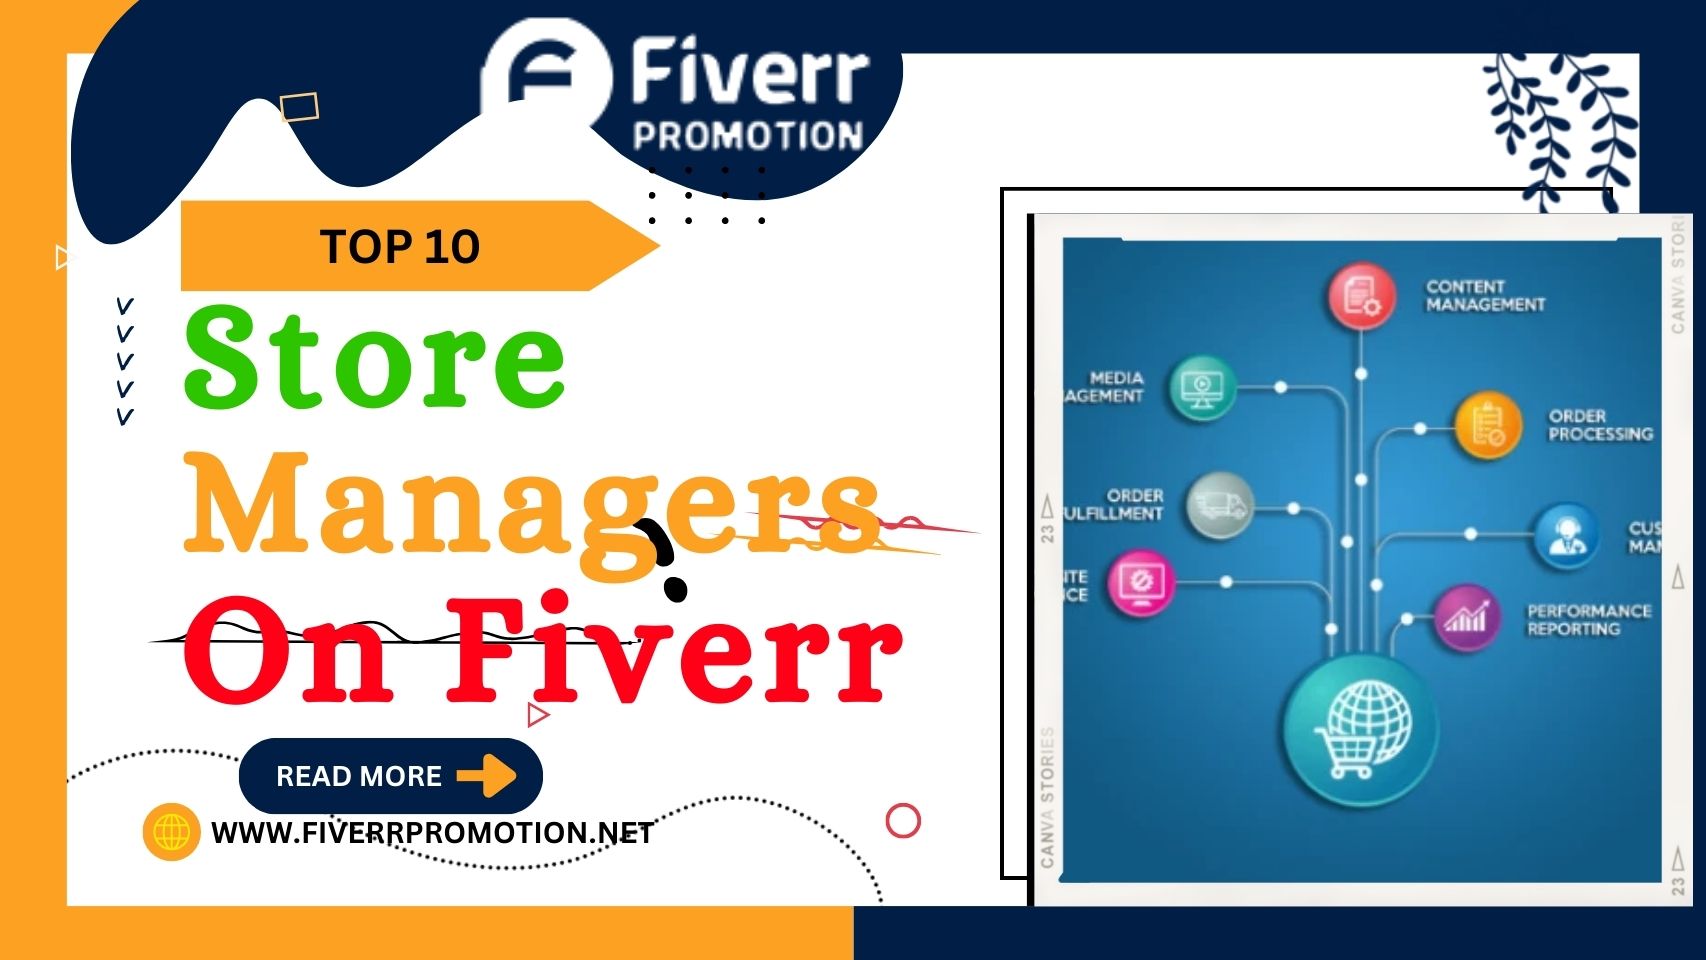 Top 10 Store Managers on Fiverr